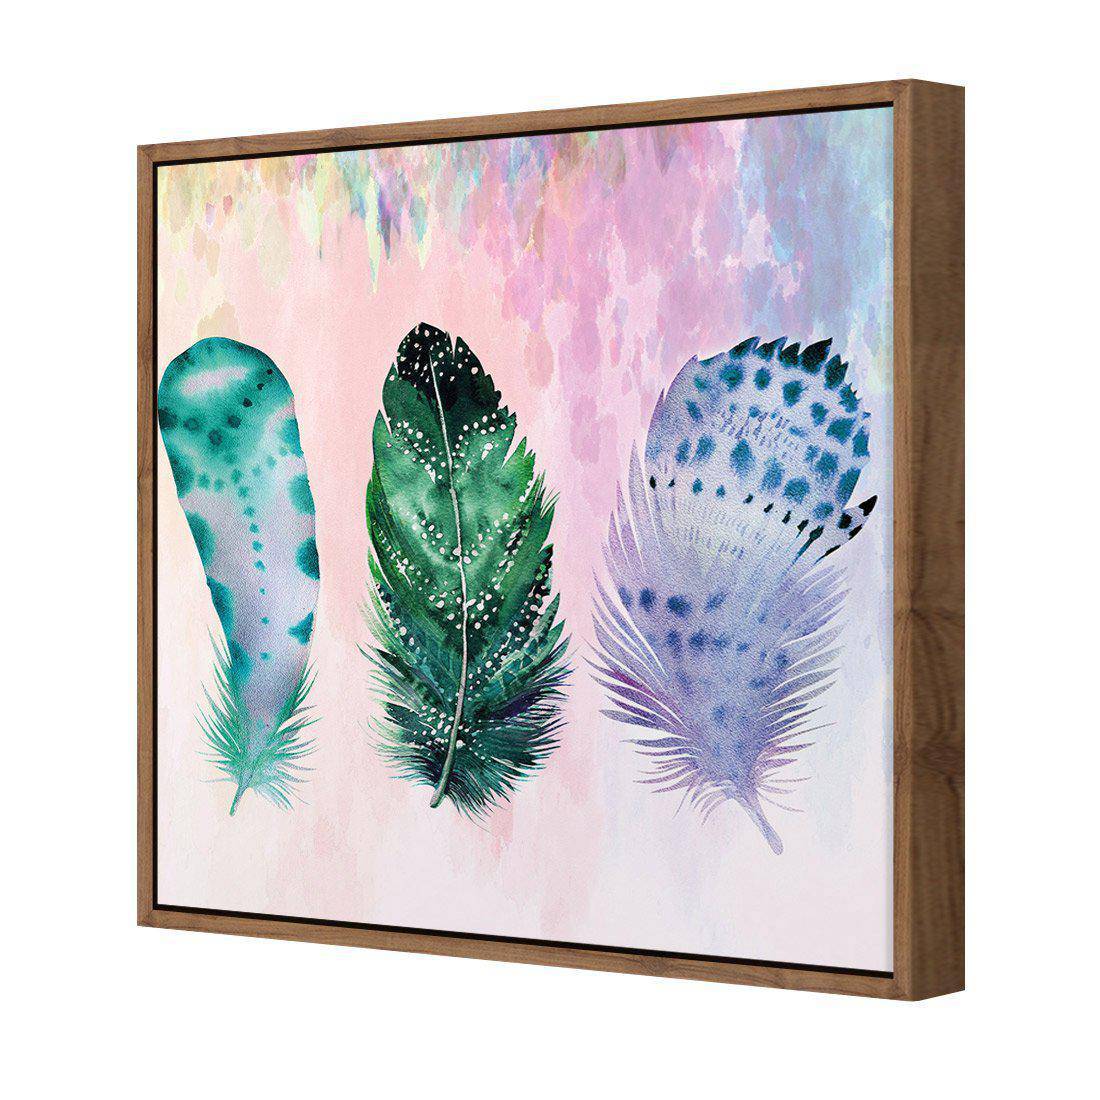 Boho Feathers, Teal, Square Canvas Art-Canvas-Wall Art Designs-30x30cm-Canvas - Natural Frame-Wall Art Designs